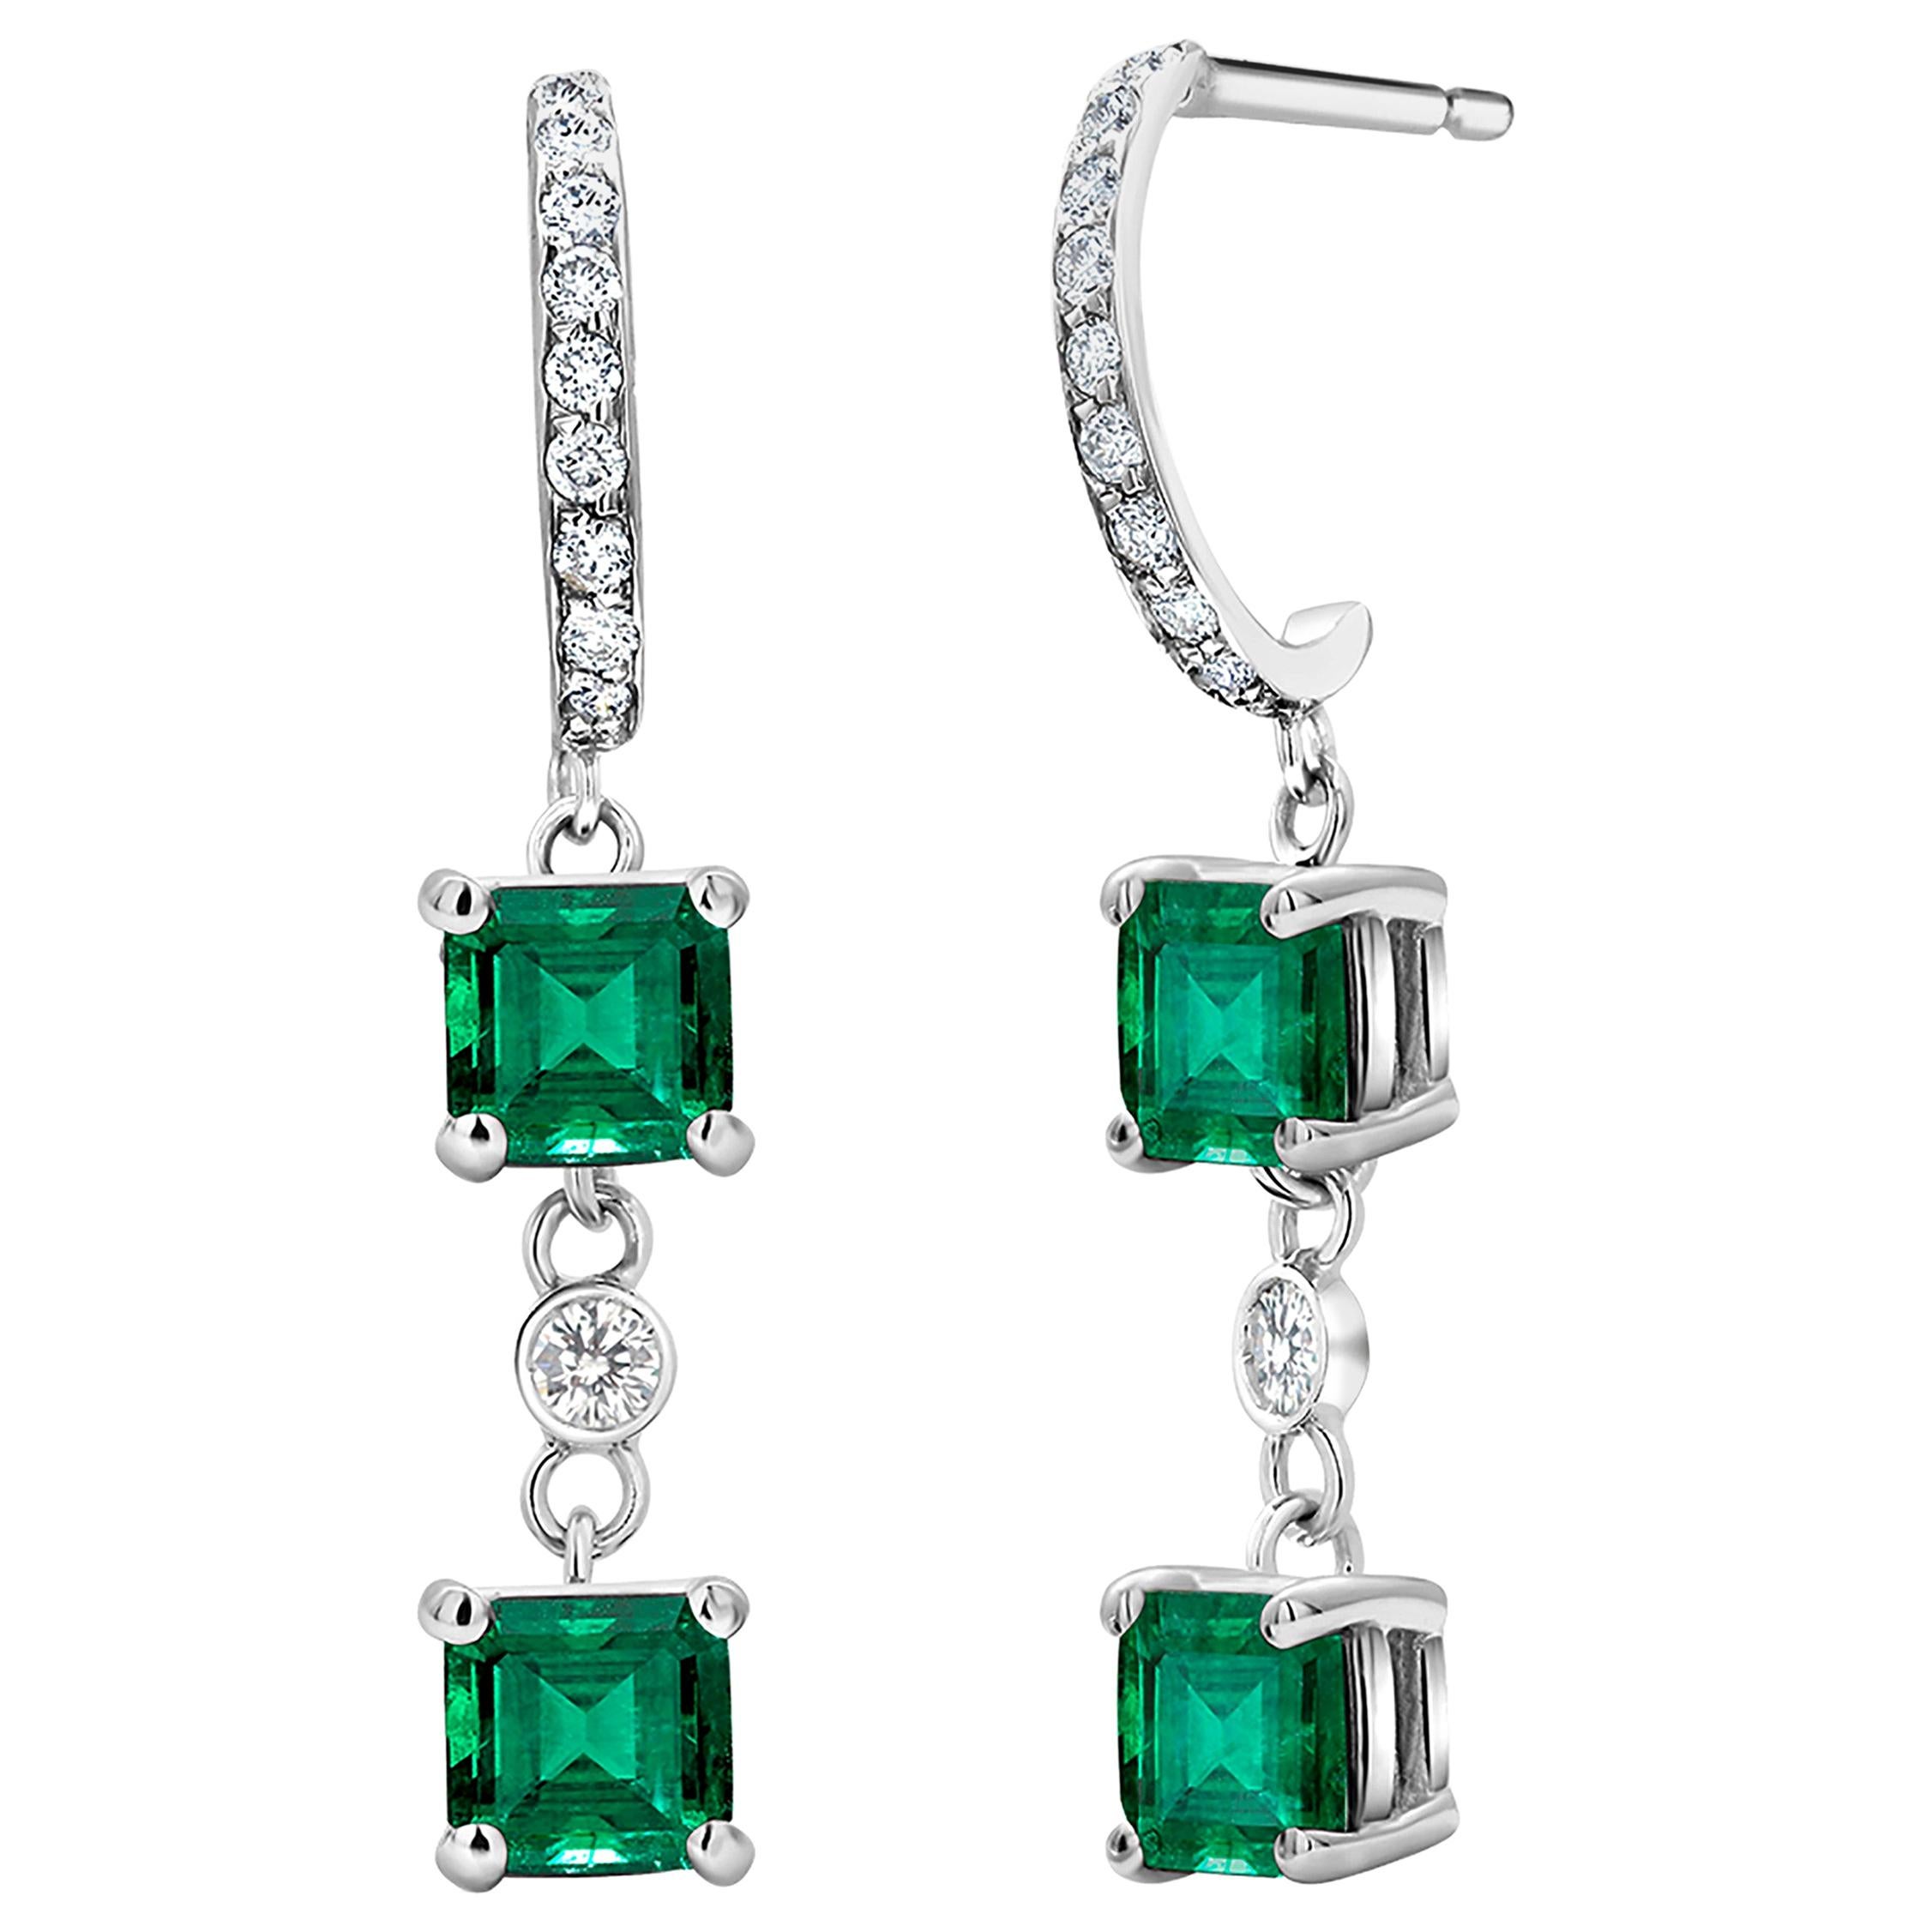 Cushion Square Colombian Emerald and Diamond Hoop Earrings Weighing 2.80 Carat